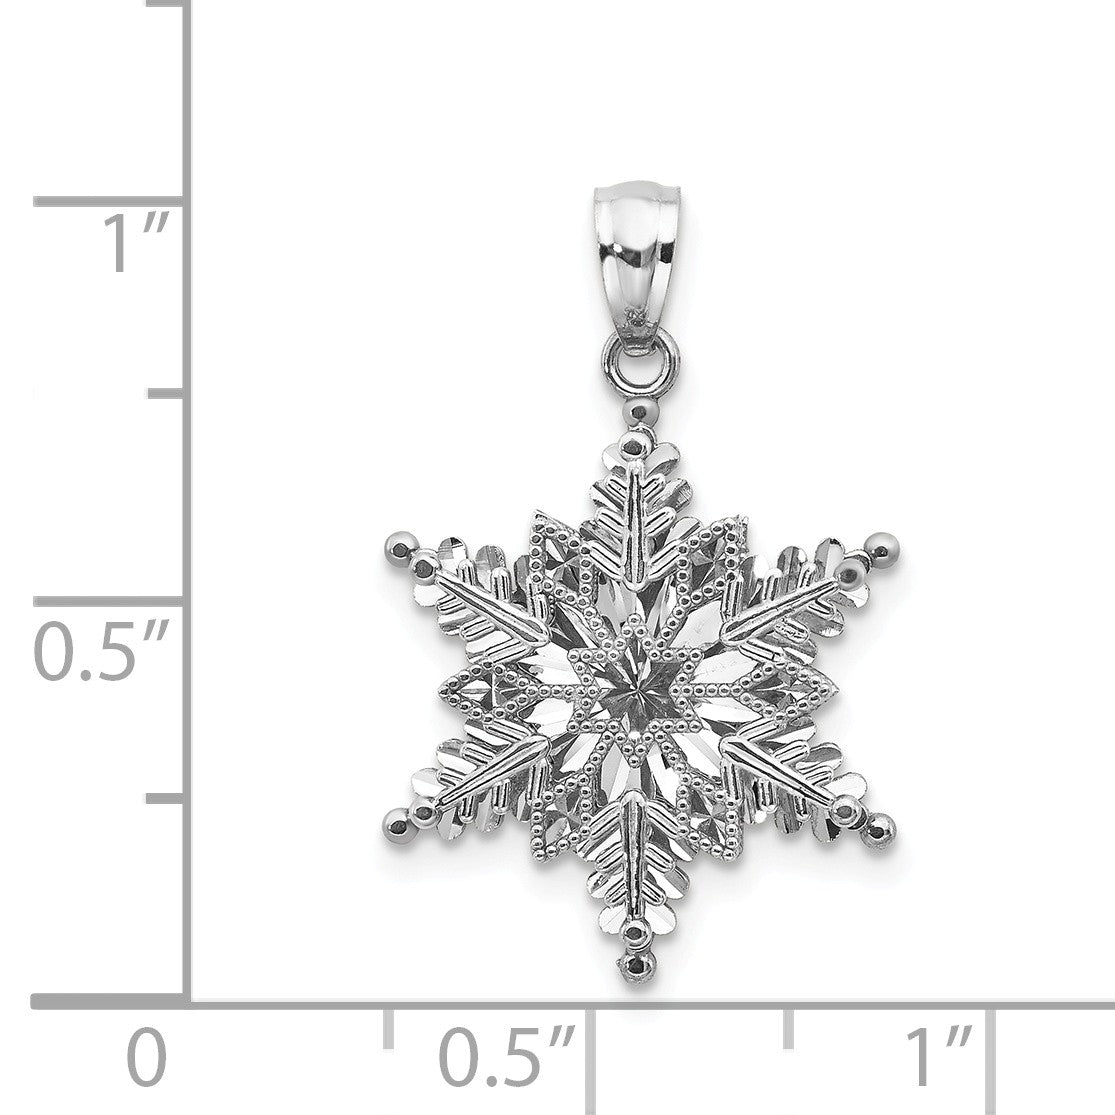 Alternate view of the 14k White Gold Stacked Snowflake Pendant, 18mm by The Black Bow Jewelry Co.